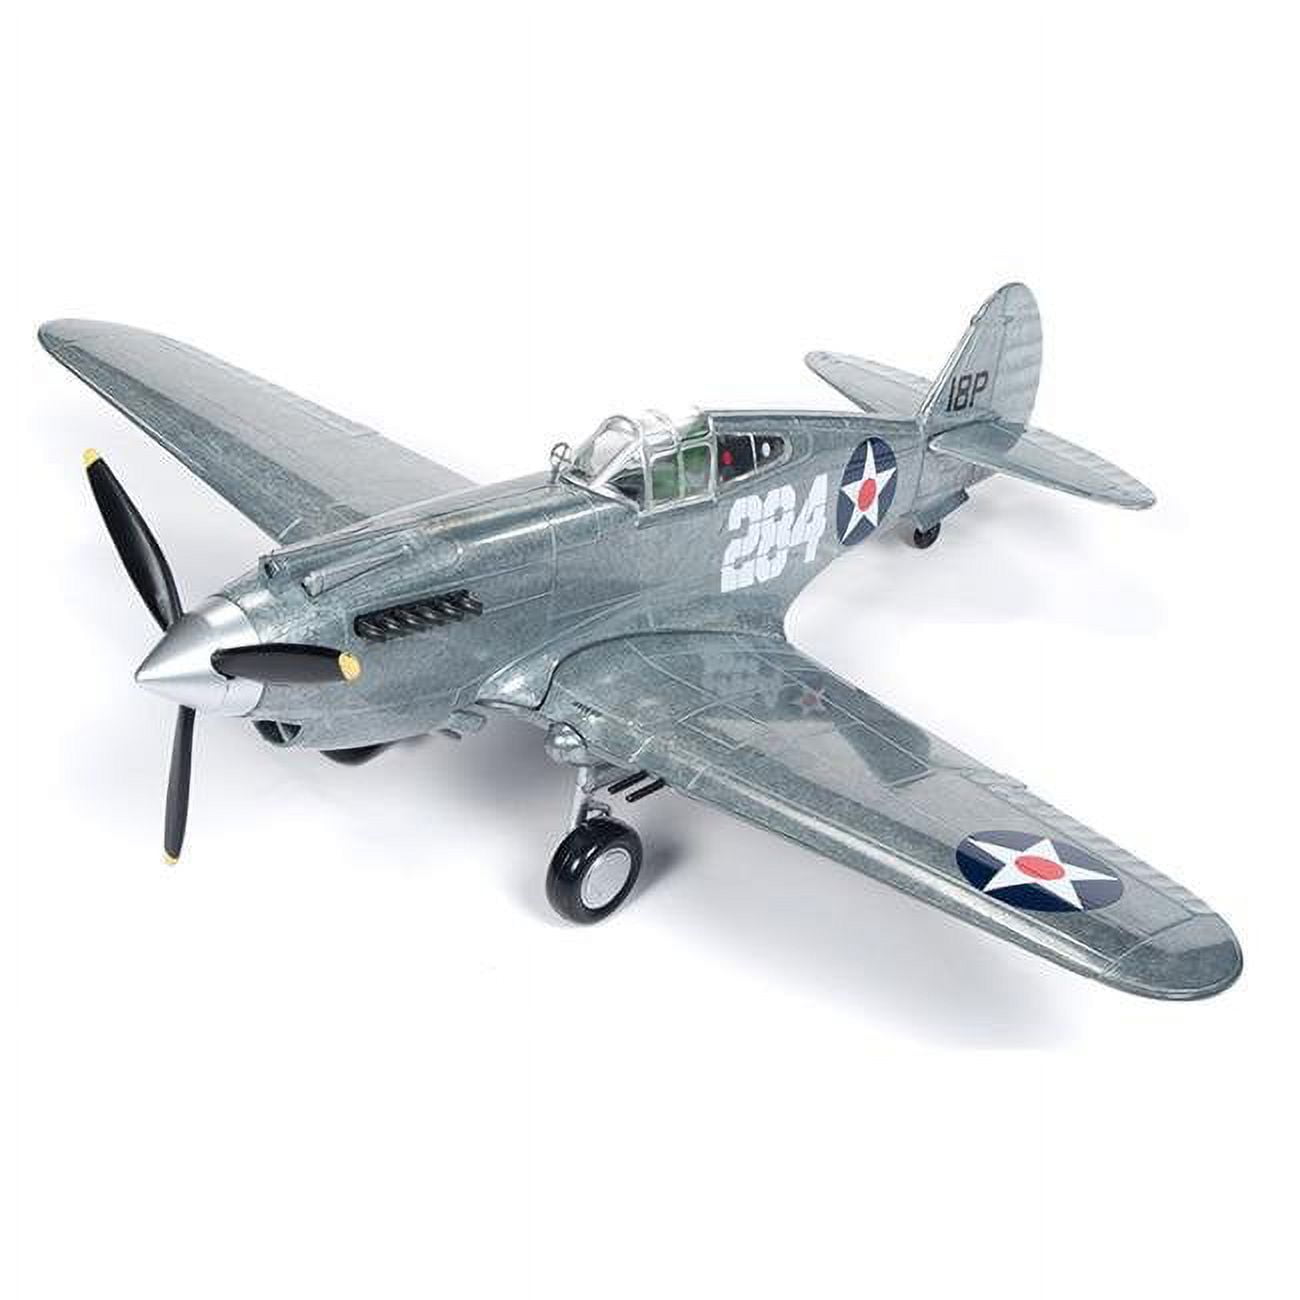 Texaco Brushed Metal Special Edition 1941 Curtiss P-40b Tomahawk Plane - No. 2 2019 In The Fuel For Victory Series